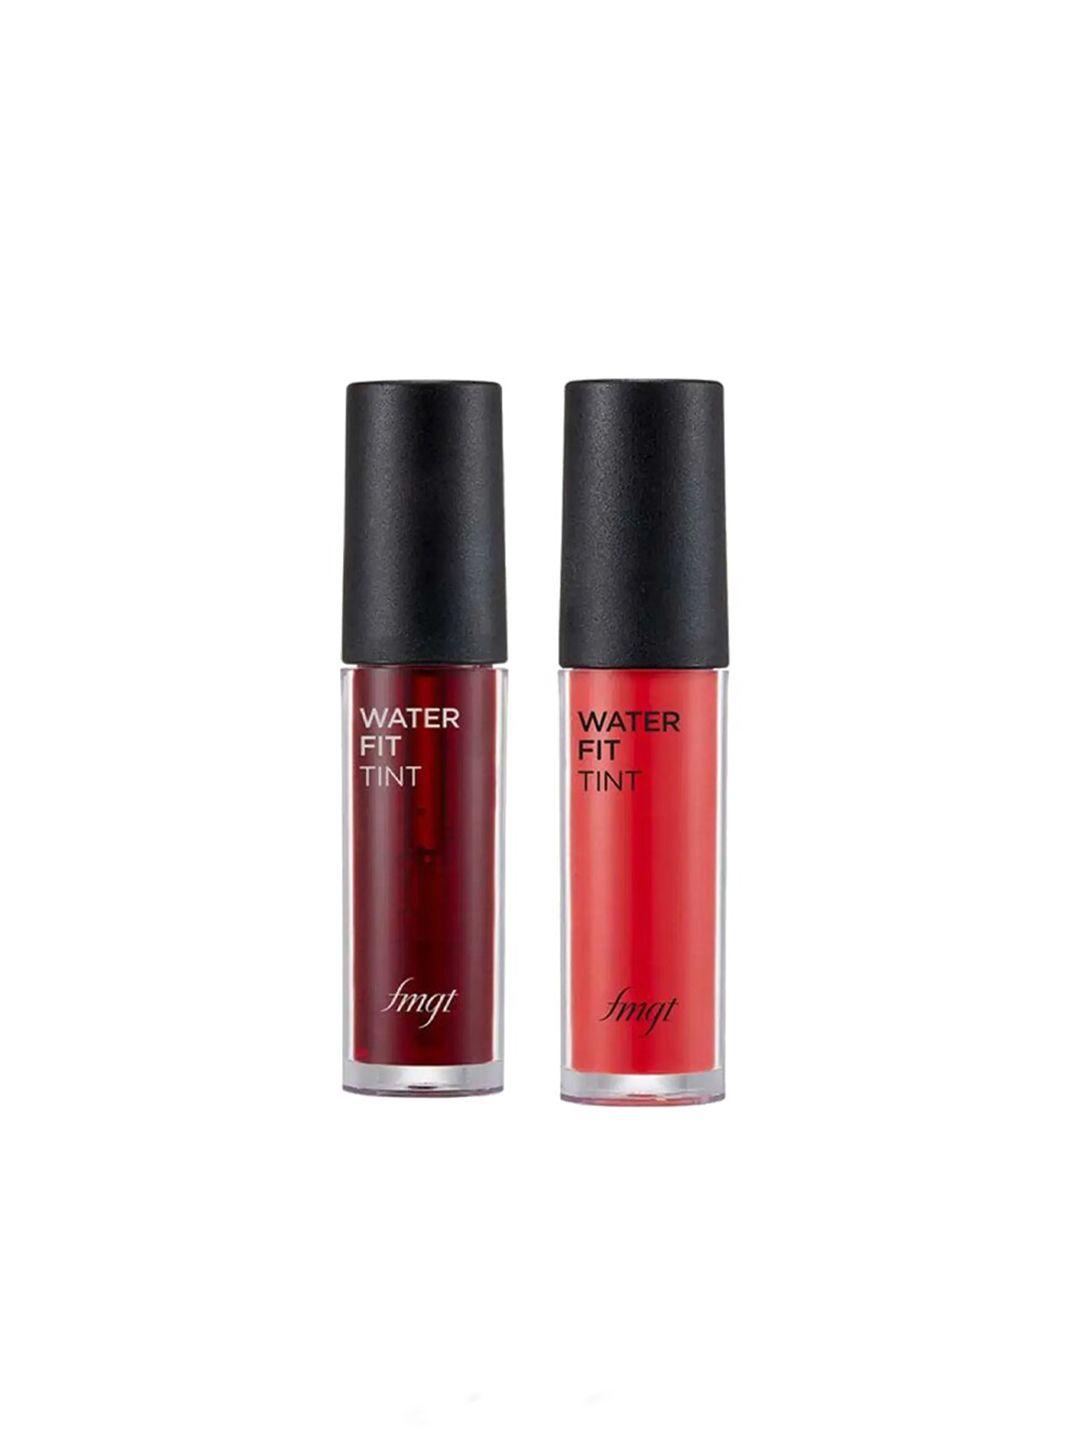 the face shop set of 2 water fit long-lasting lip tint 5g each - pink mate & red signal